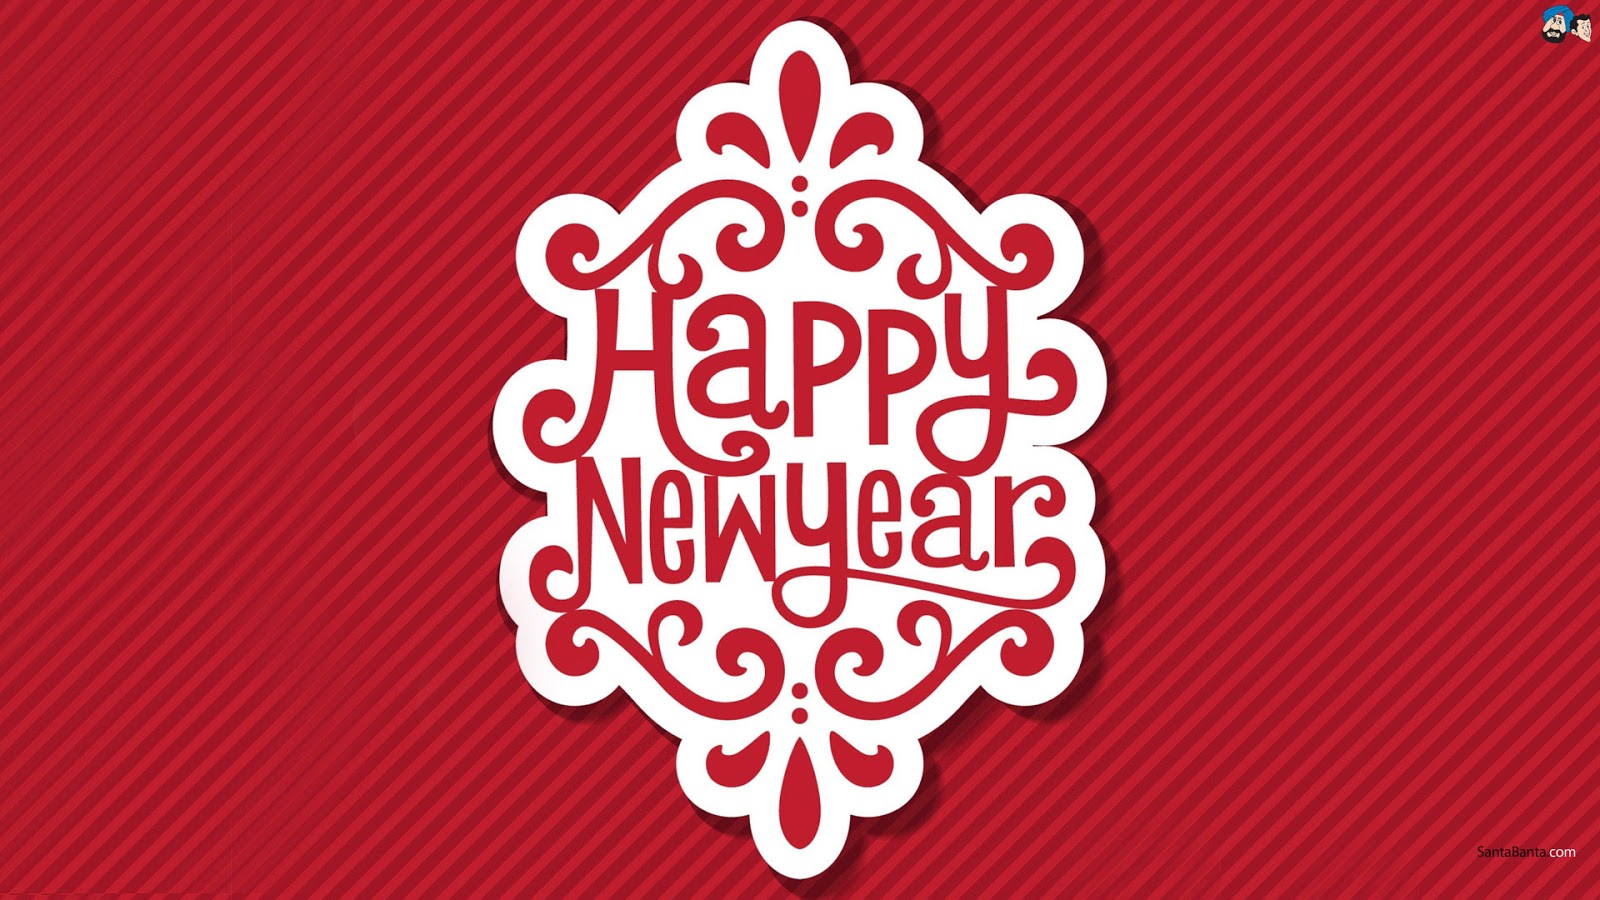 2013-happy-new-year-wallpapers-(7).jpg